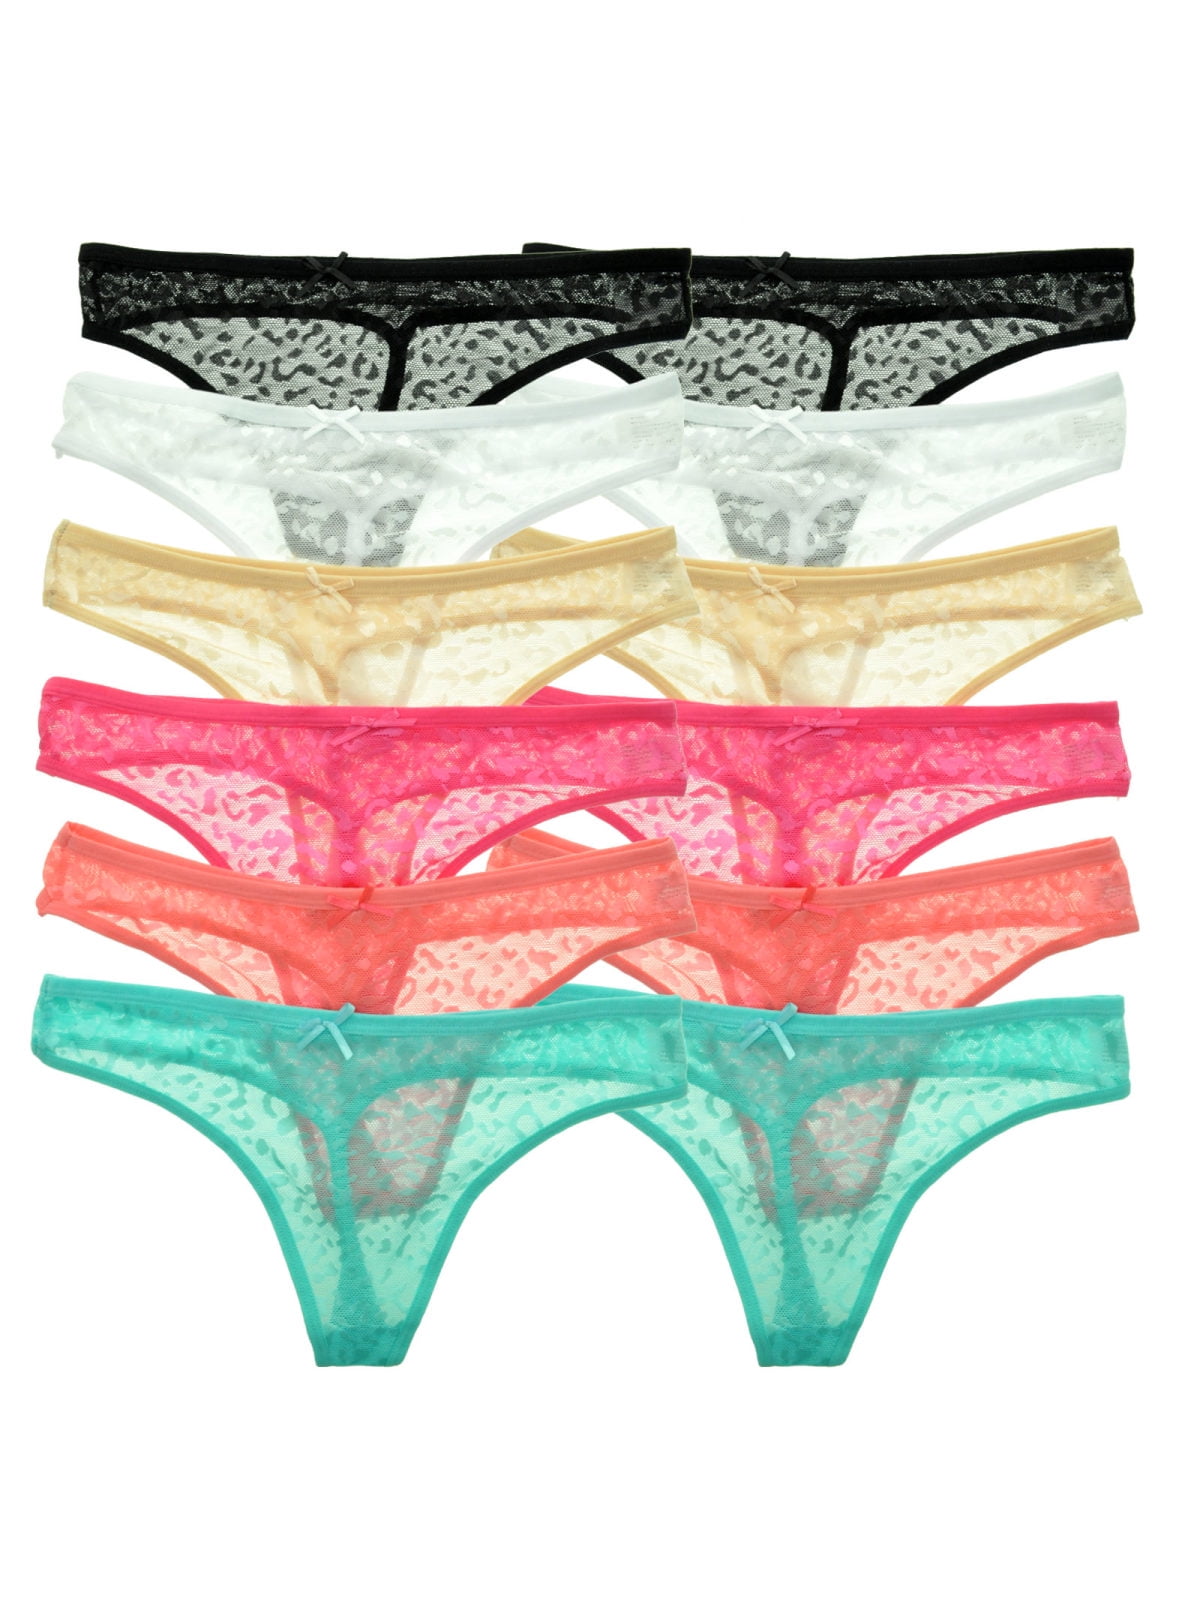 Emprella Womens Underwear Thong Panties - 10 Pack Colors and